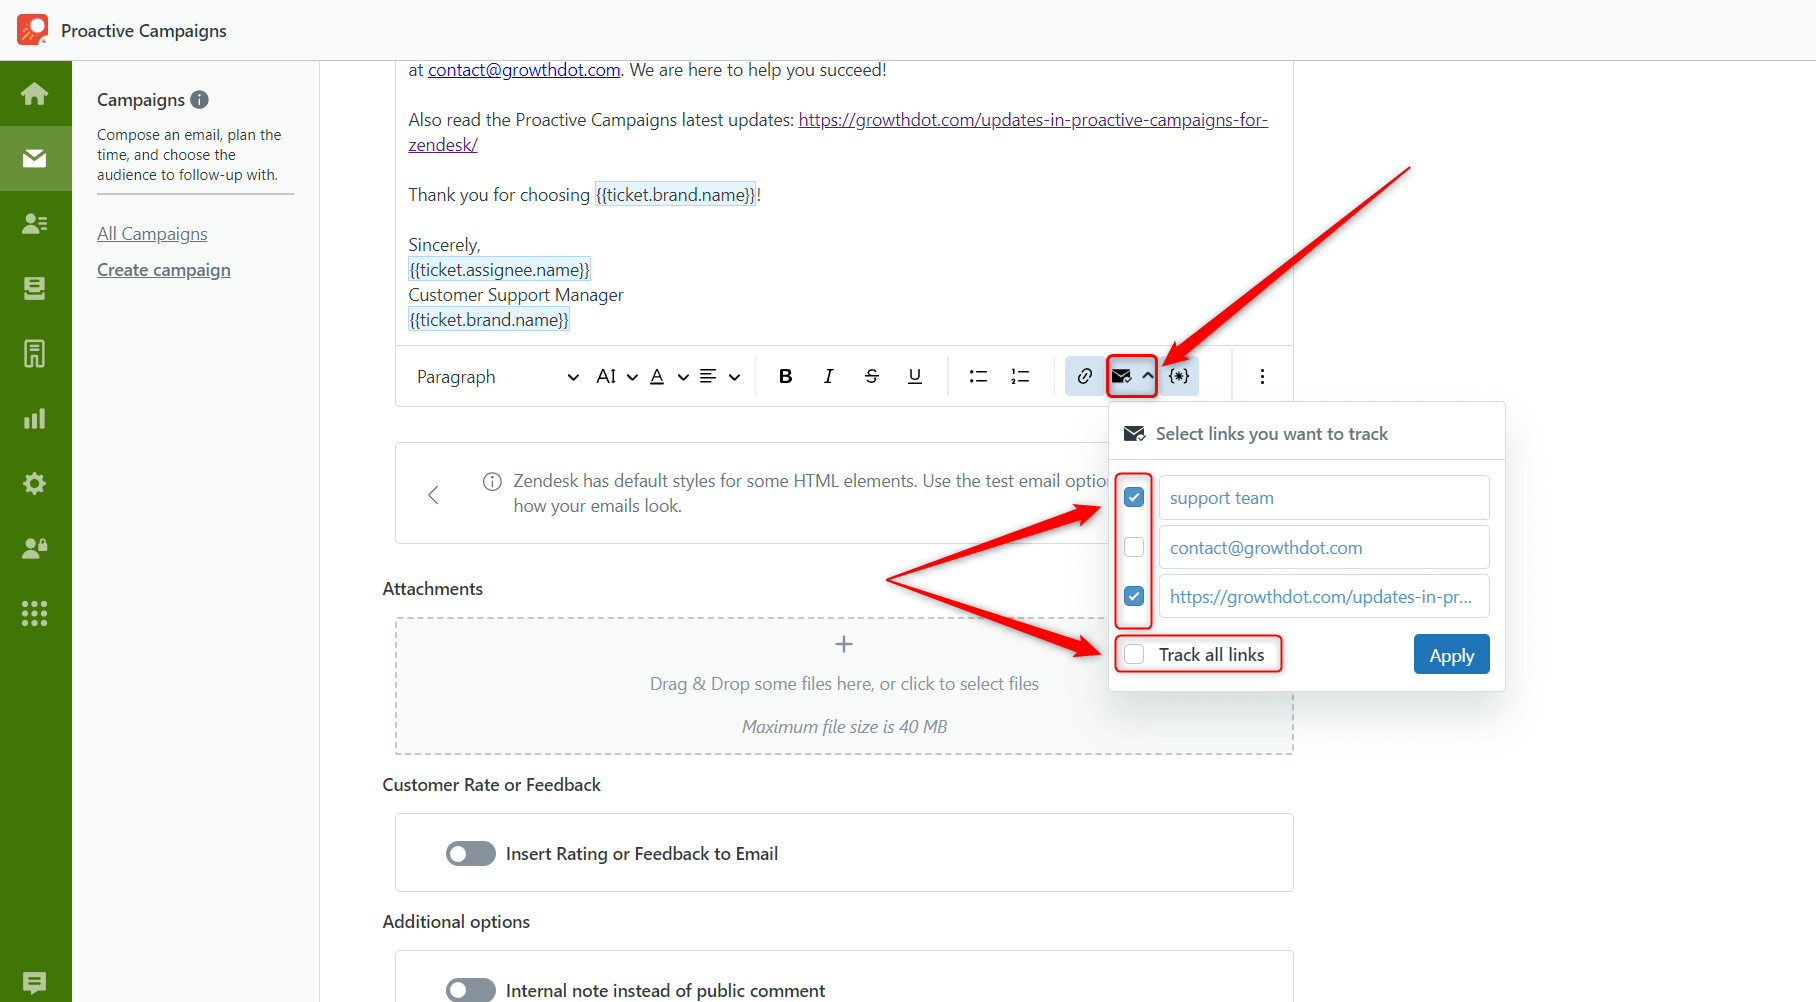 Link Tracking Button